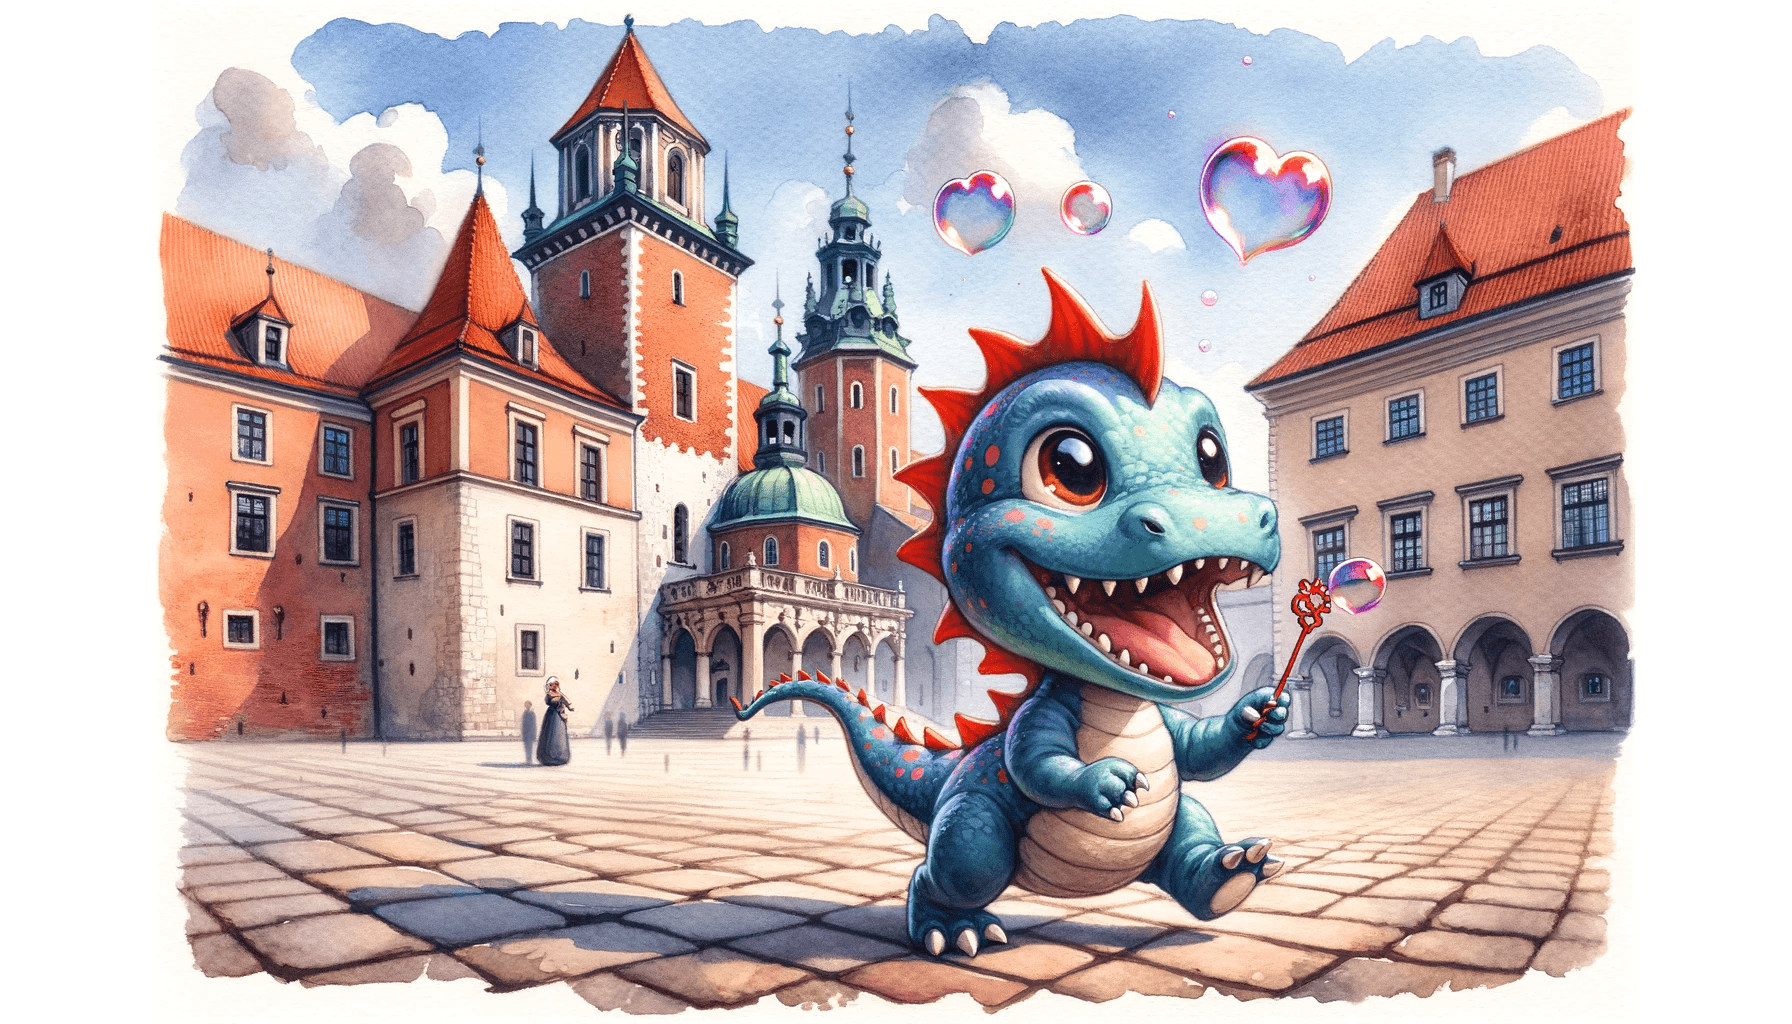 What to do in Krakow on Valentine's Day?